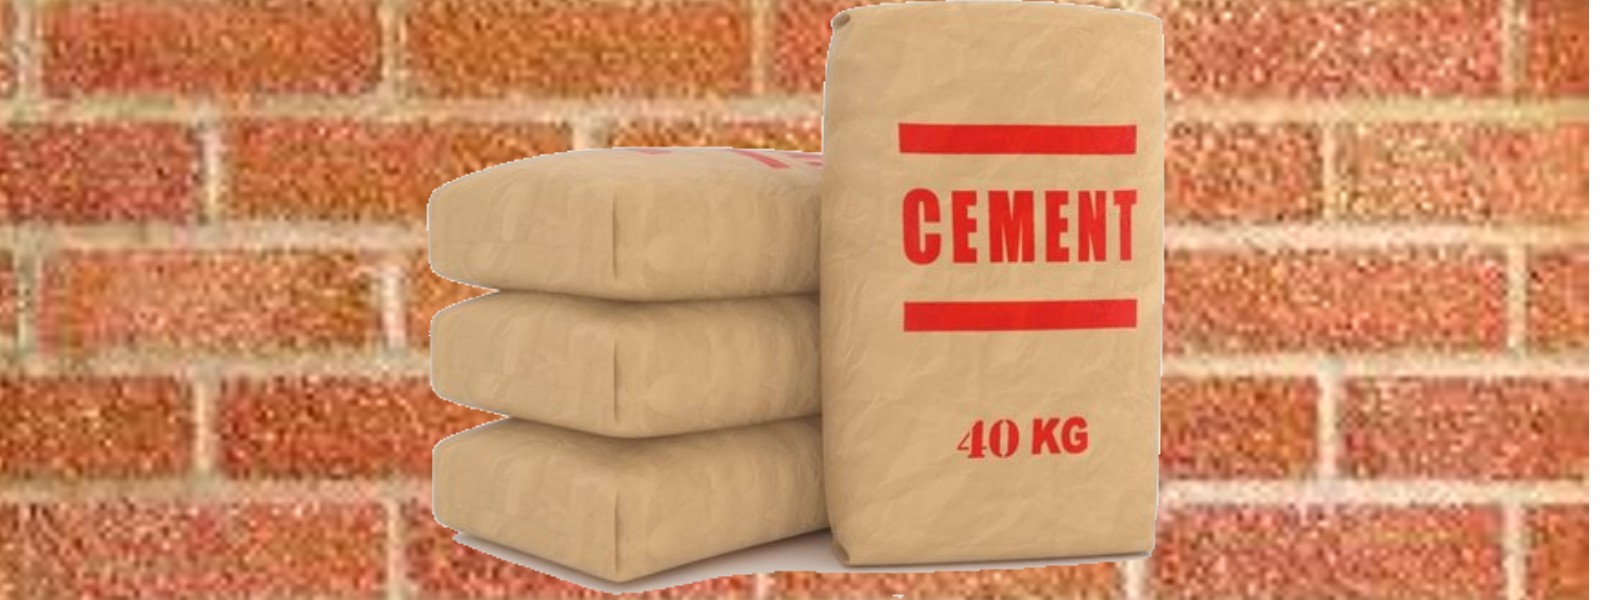 Shortage of Cement will be rectified soon: Minister